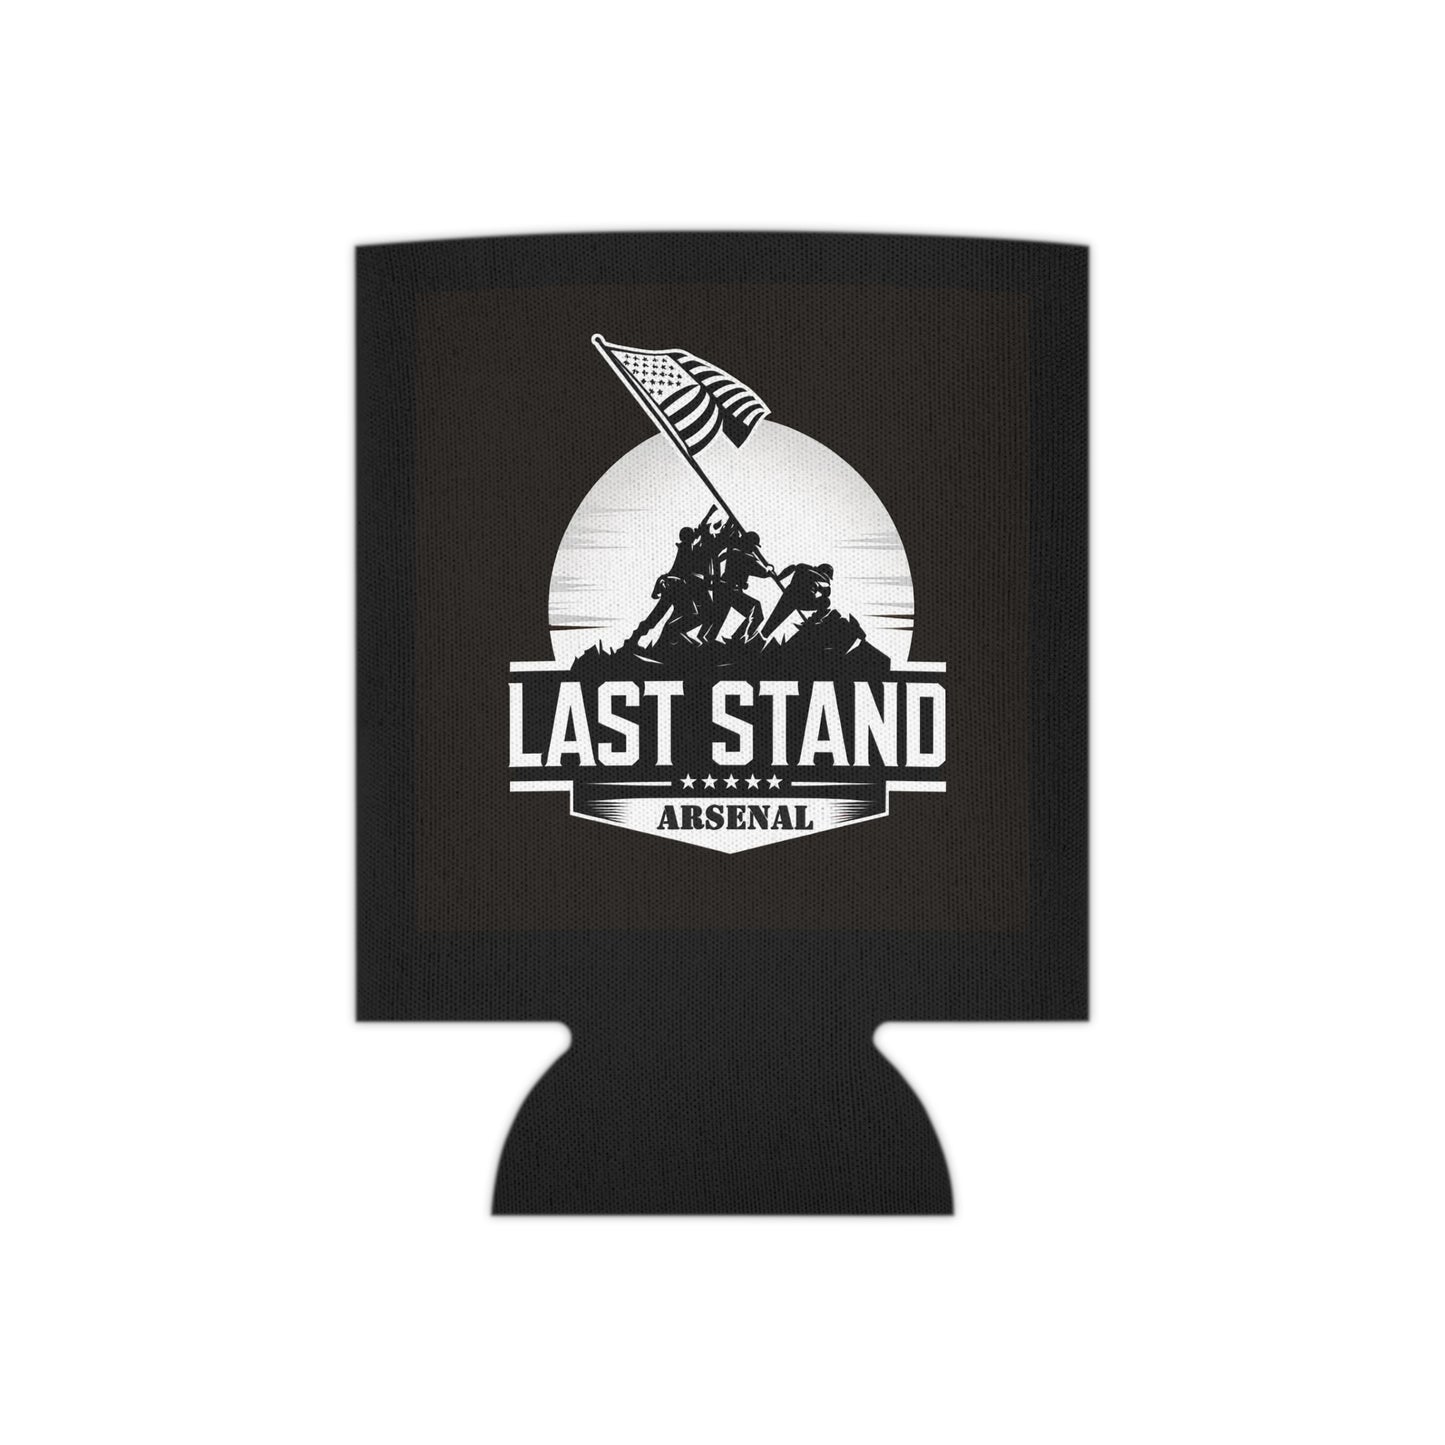 Last Stand Arsenal - Can Cooler